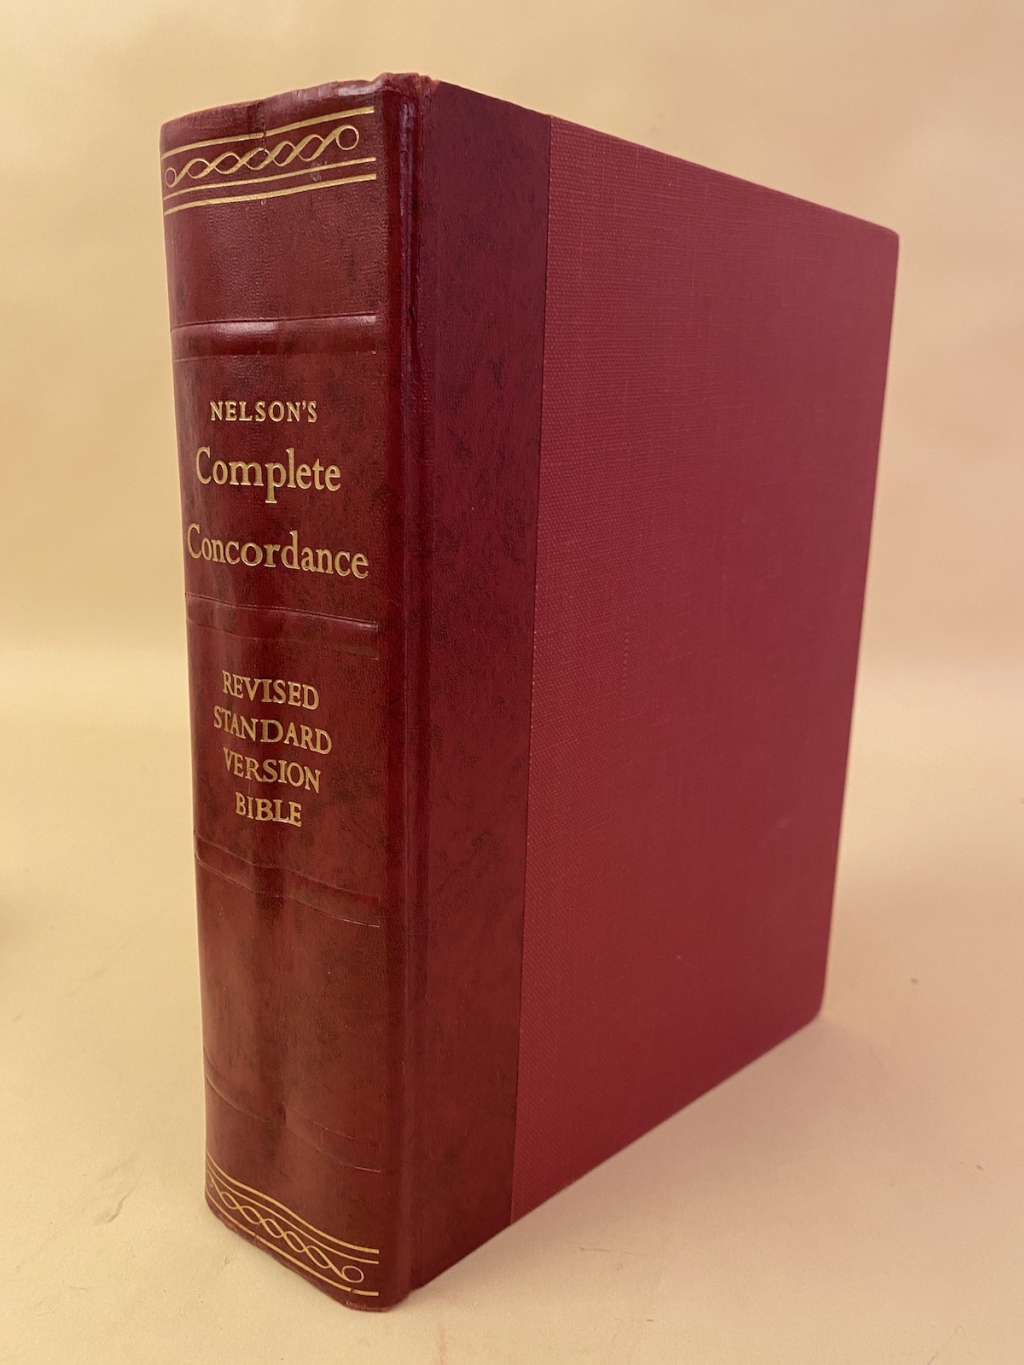 Binding on Nelson's computerized concordance to the bible